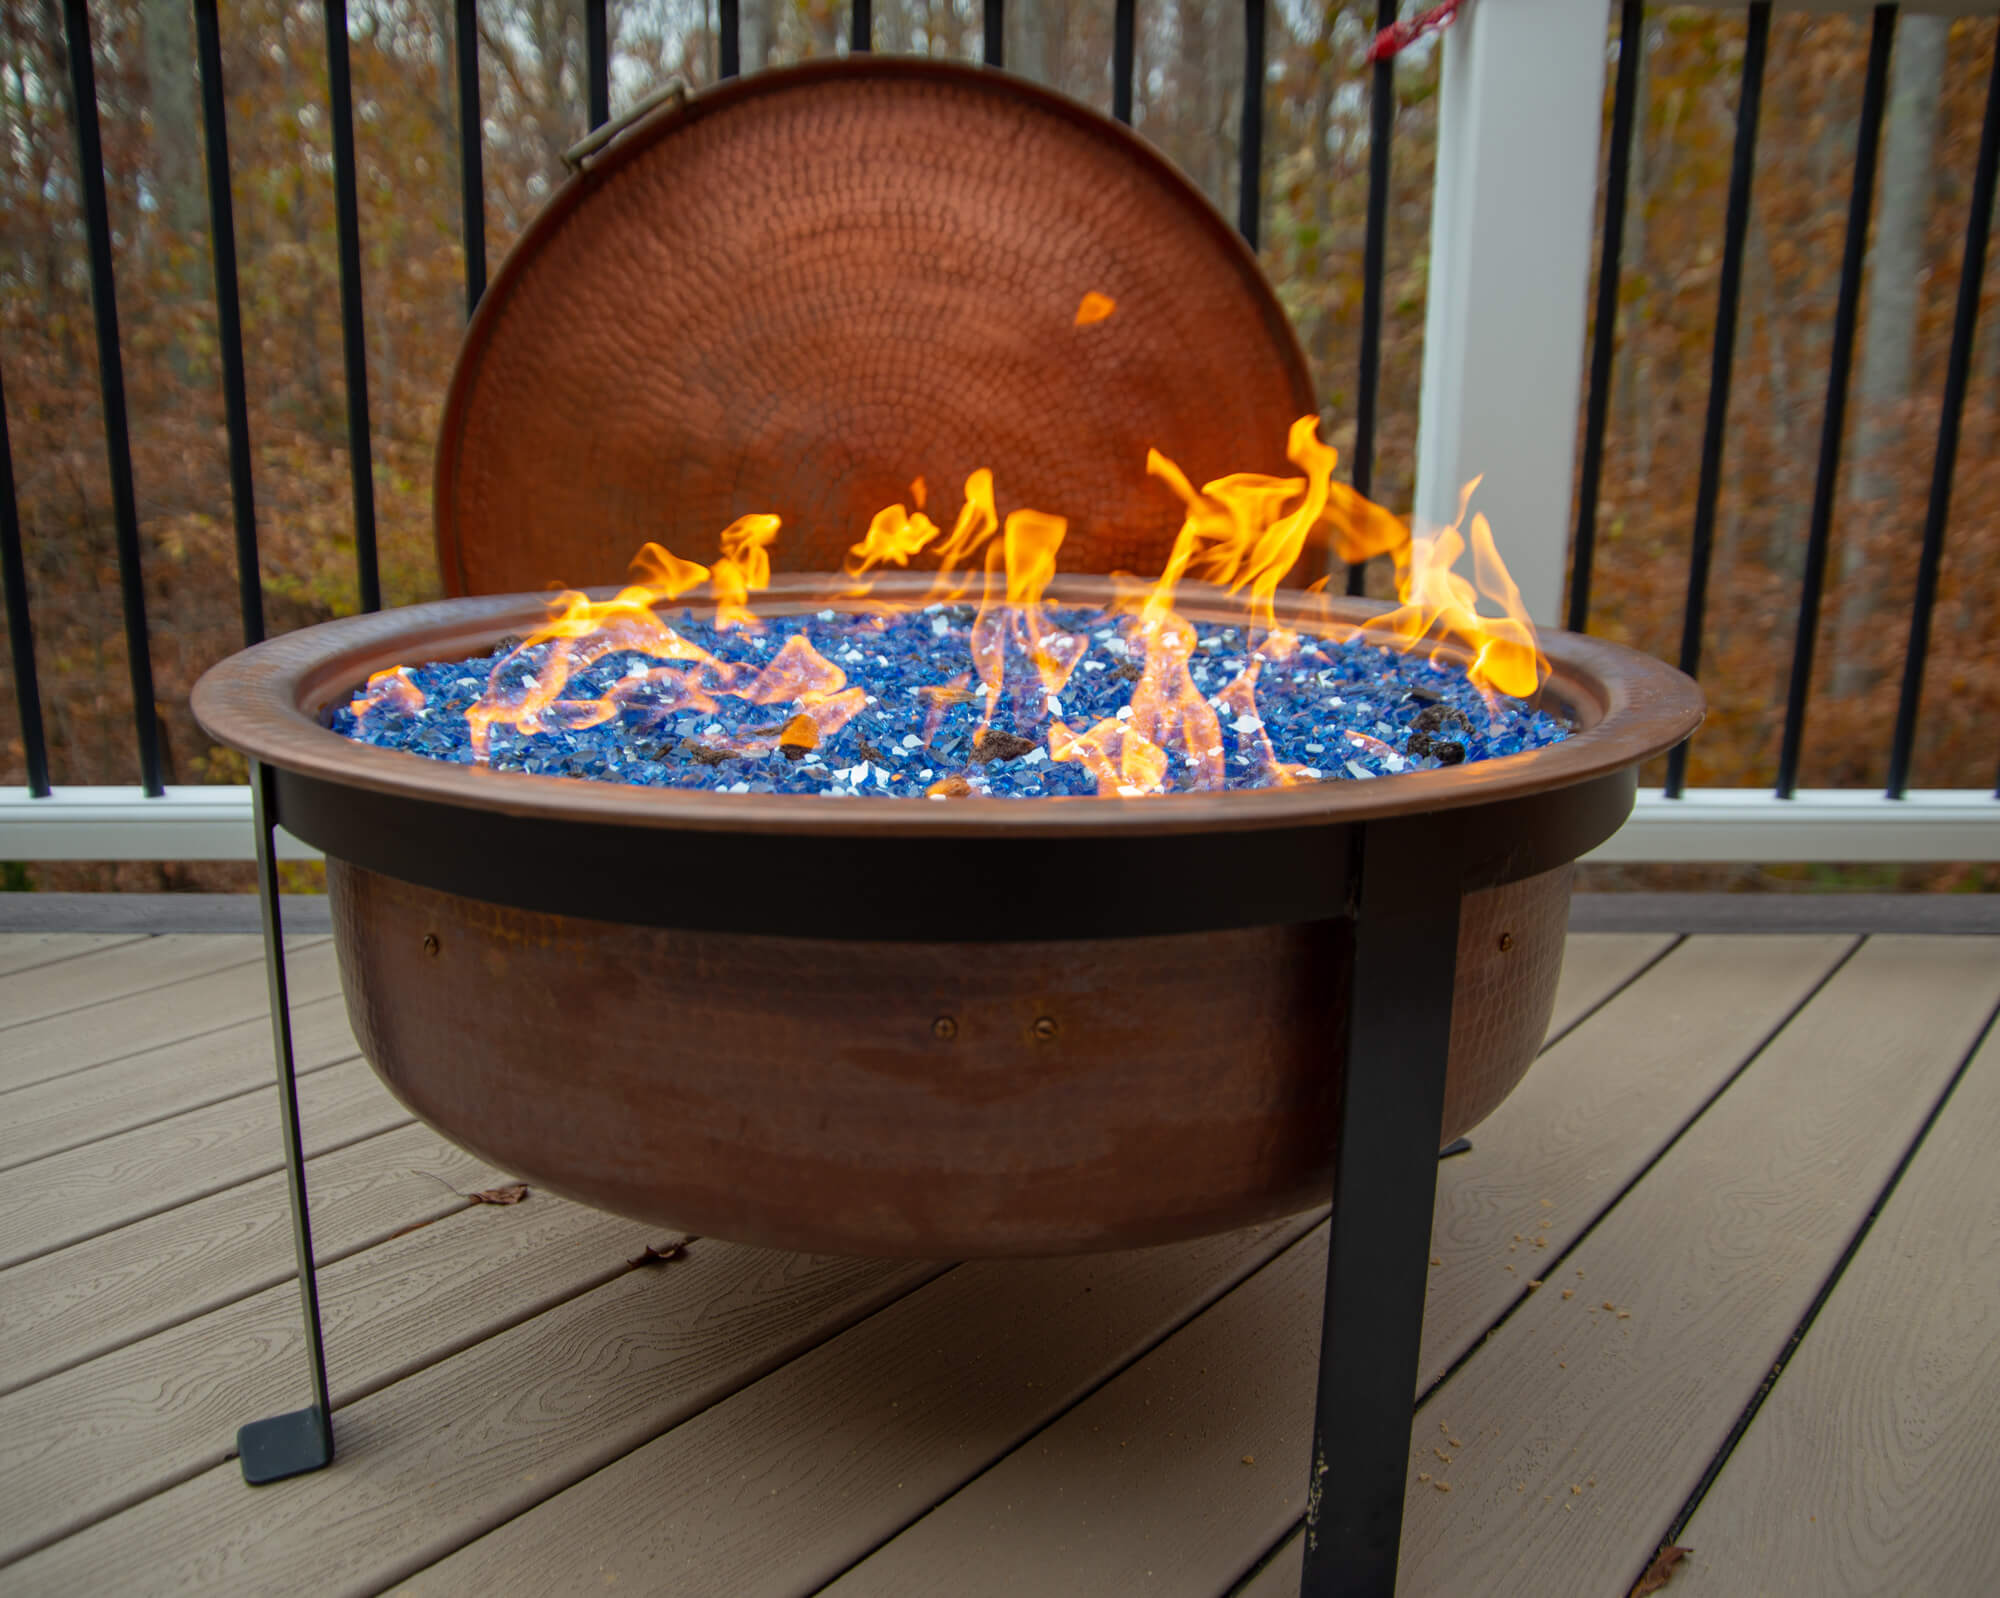 6 Ways To Put A Fire Pit On Wooden Deck, Deck Top Fire Pit